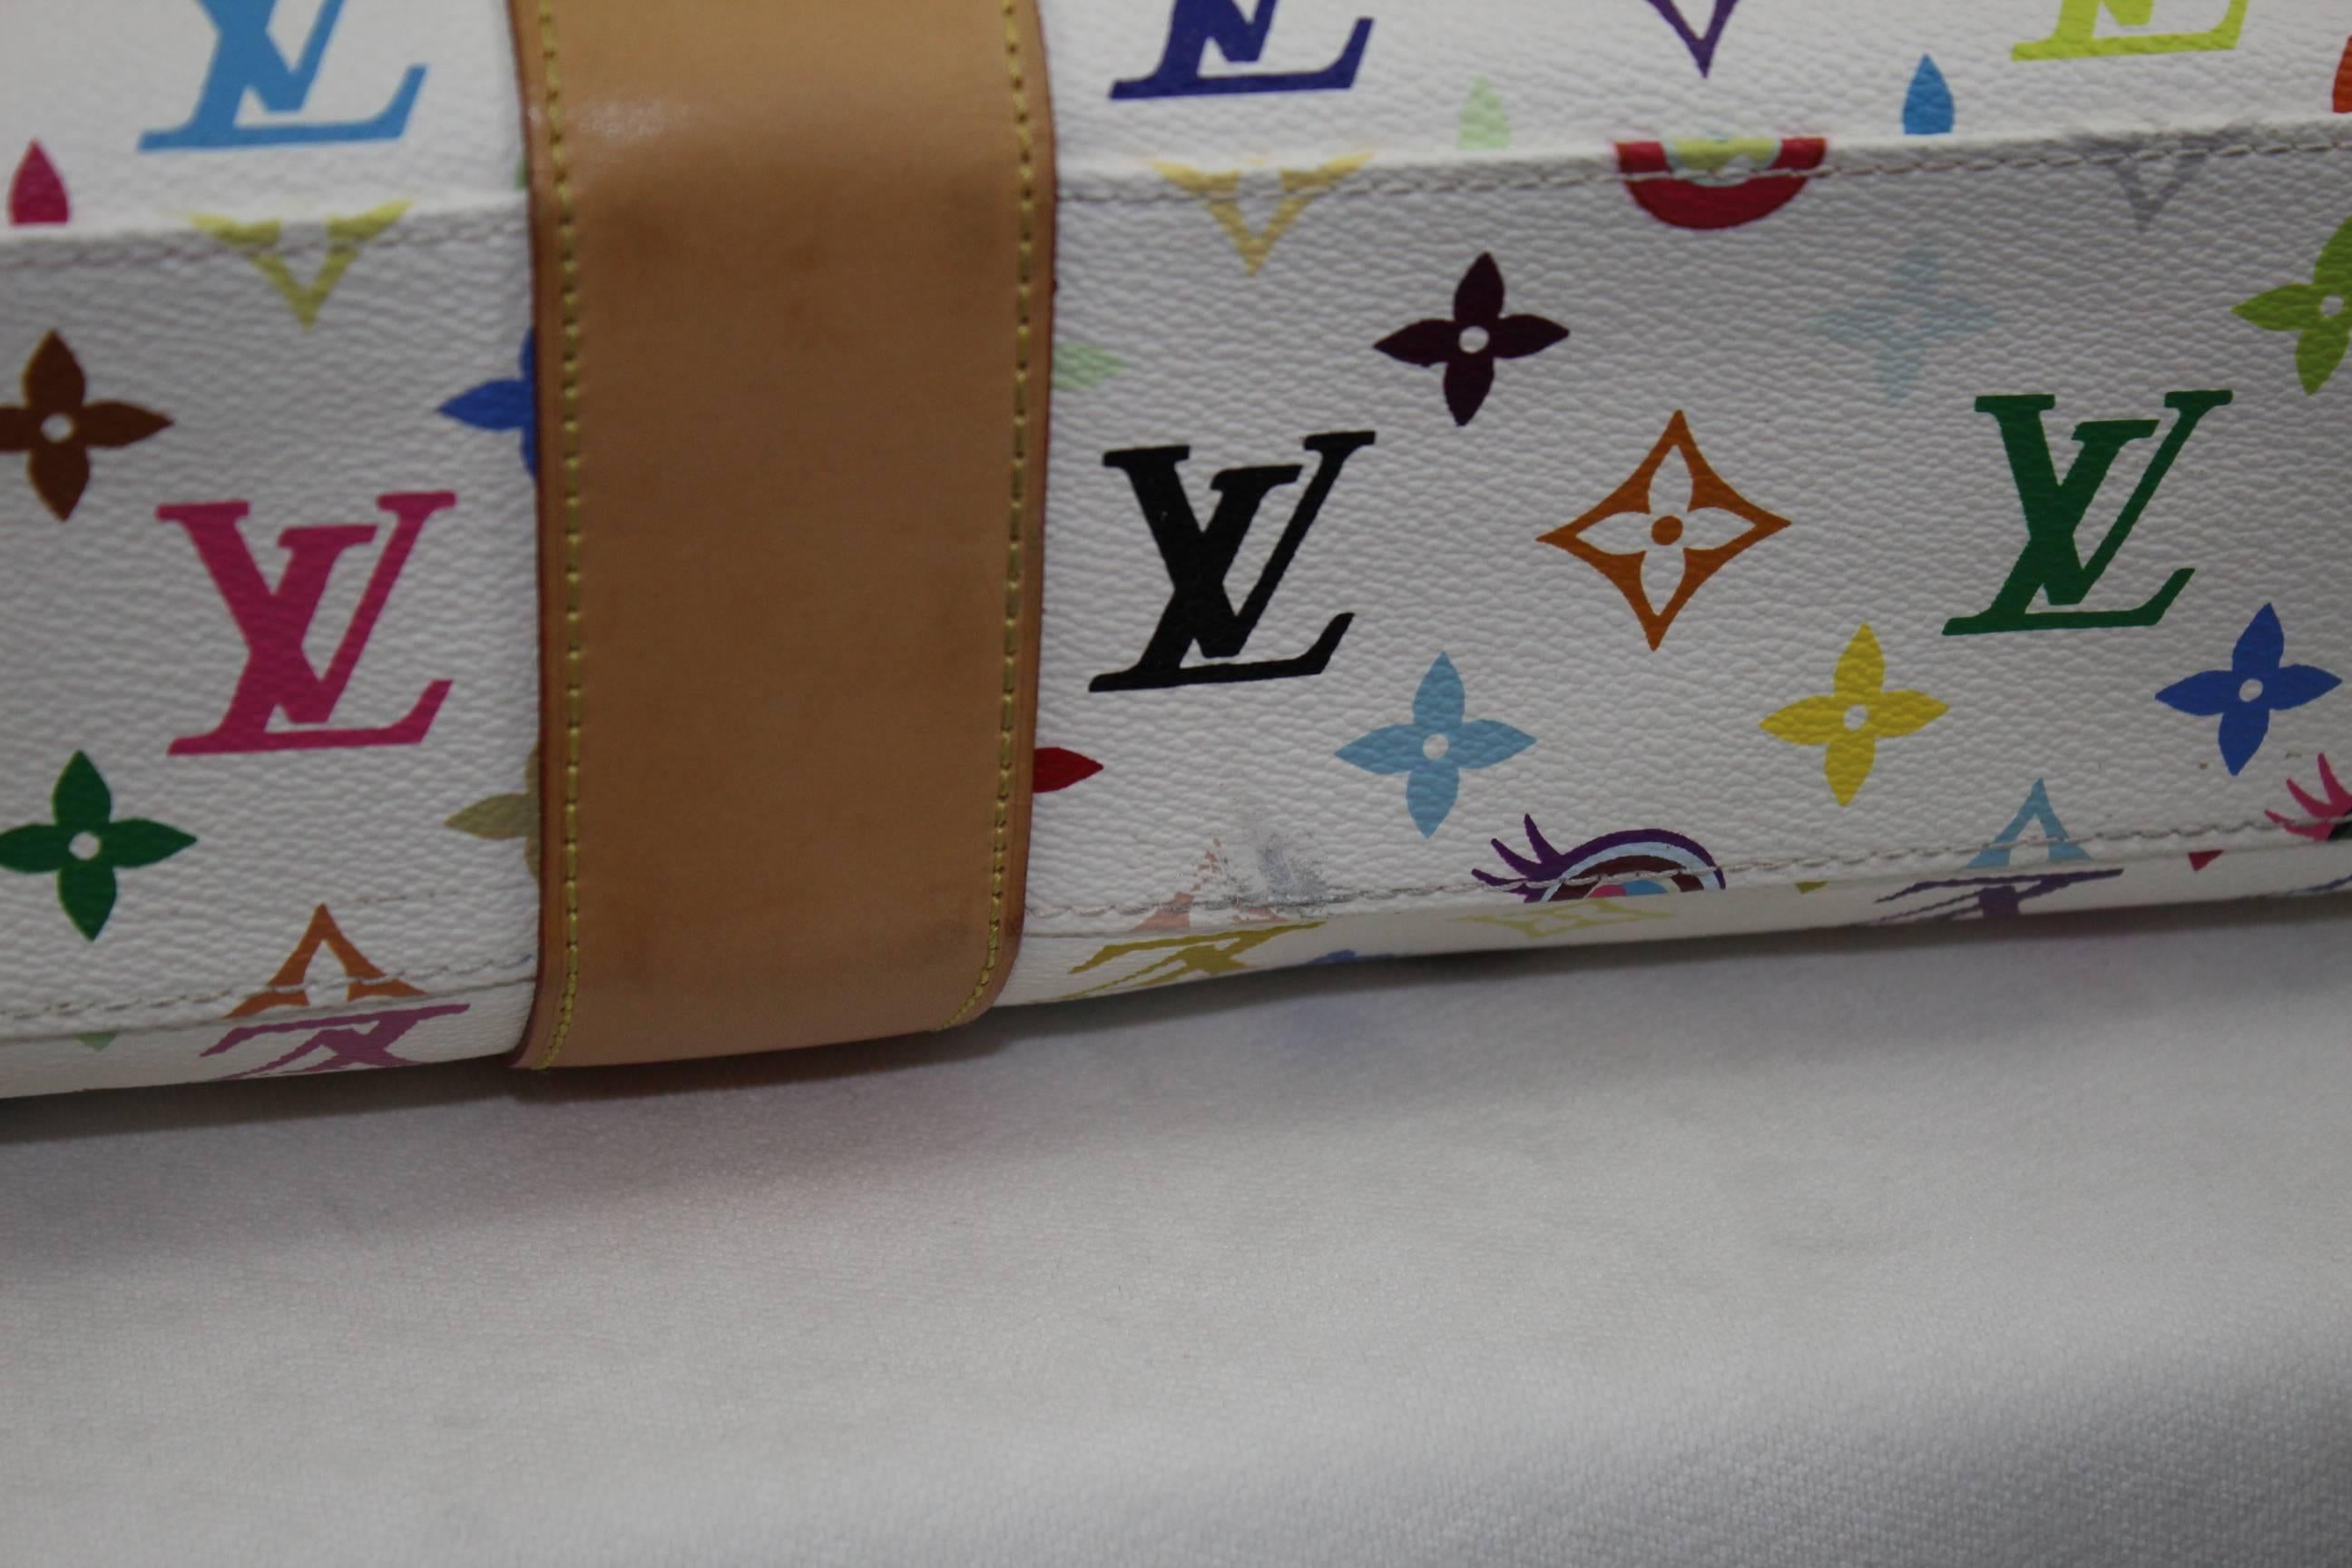 louis vuitton bag with eyes